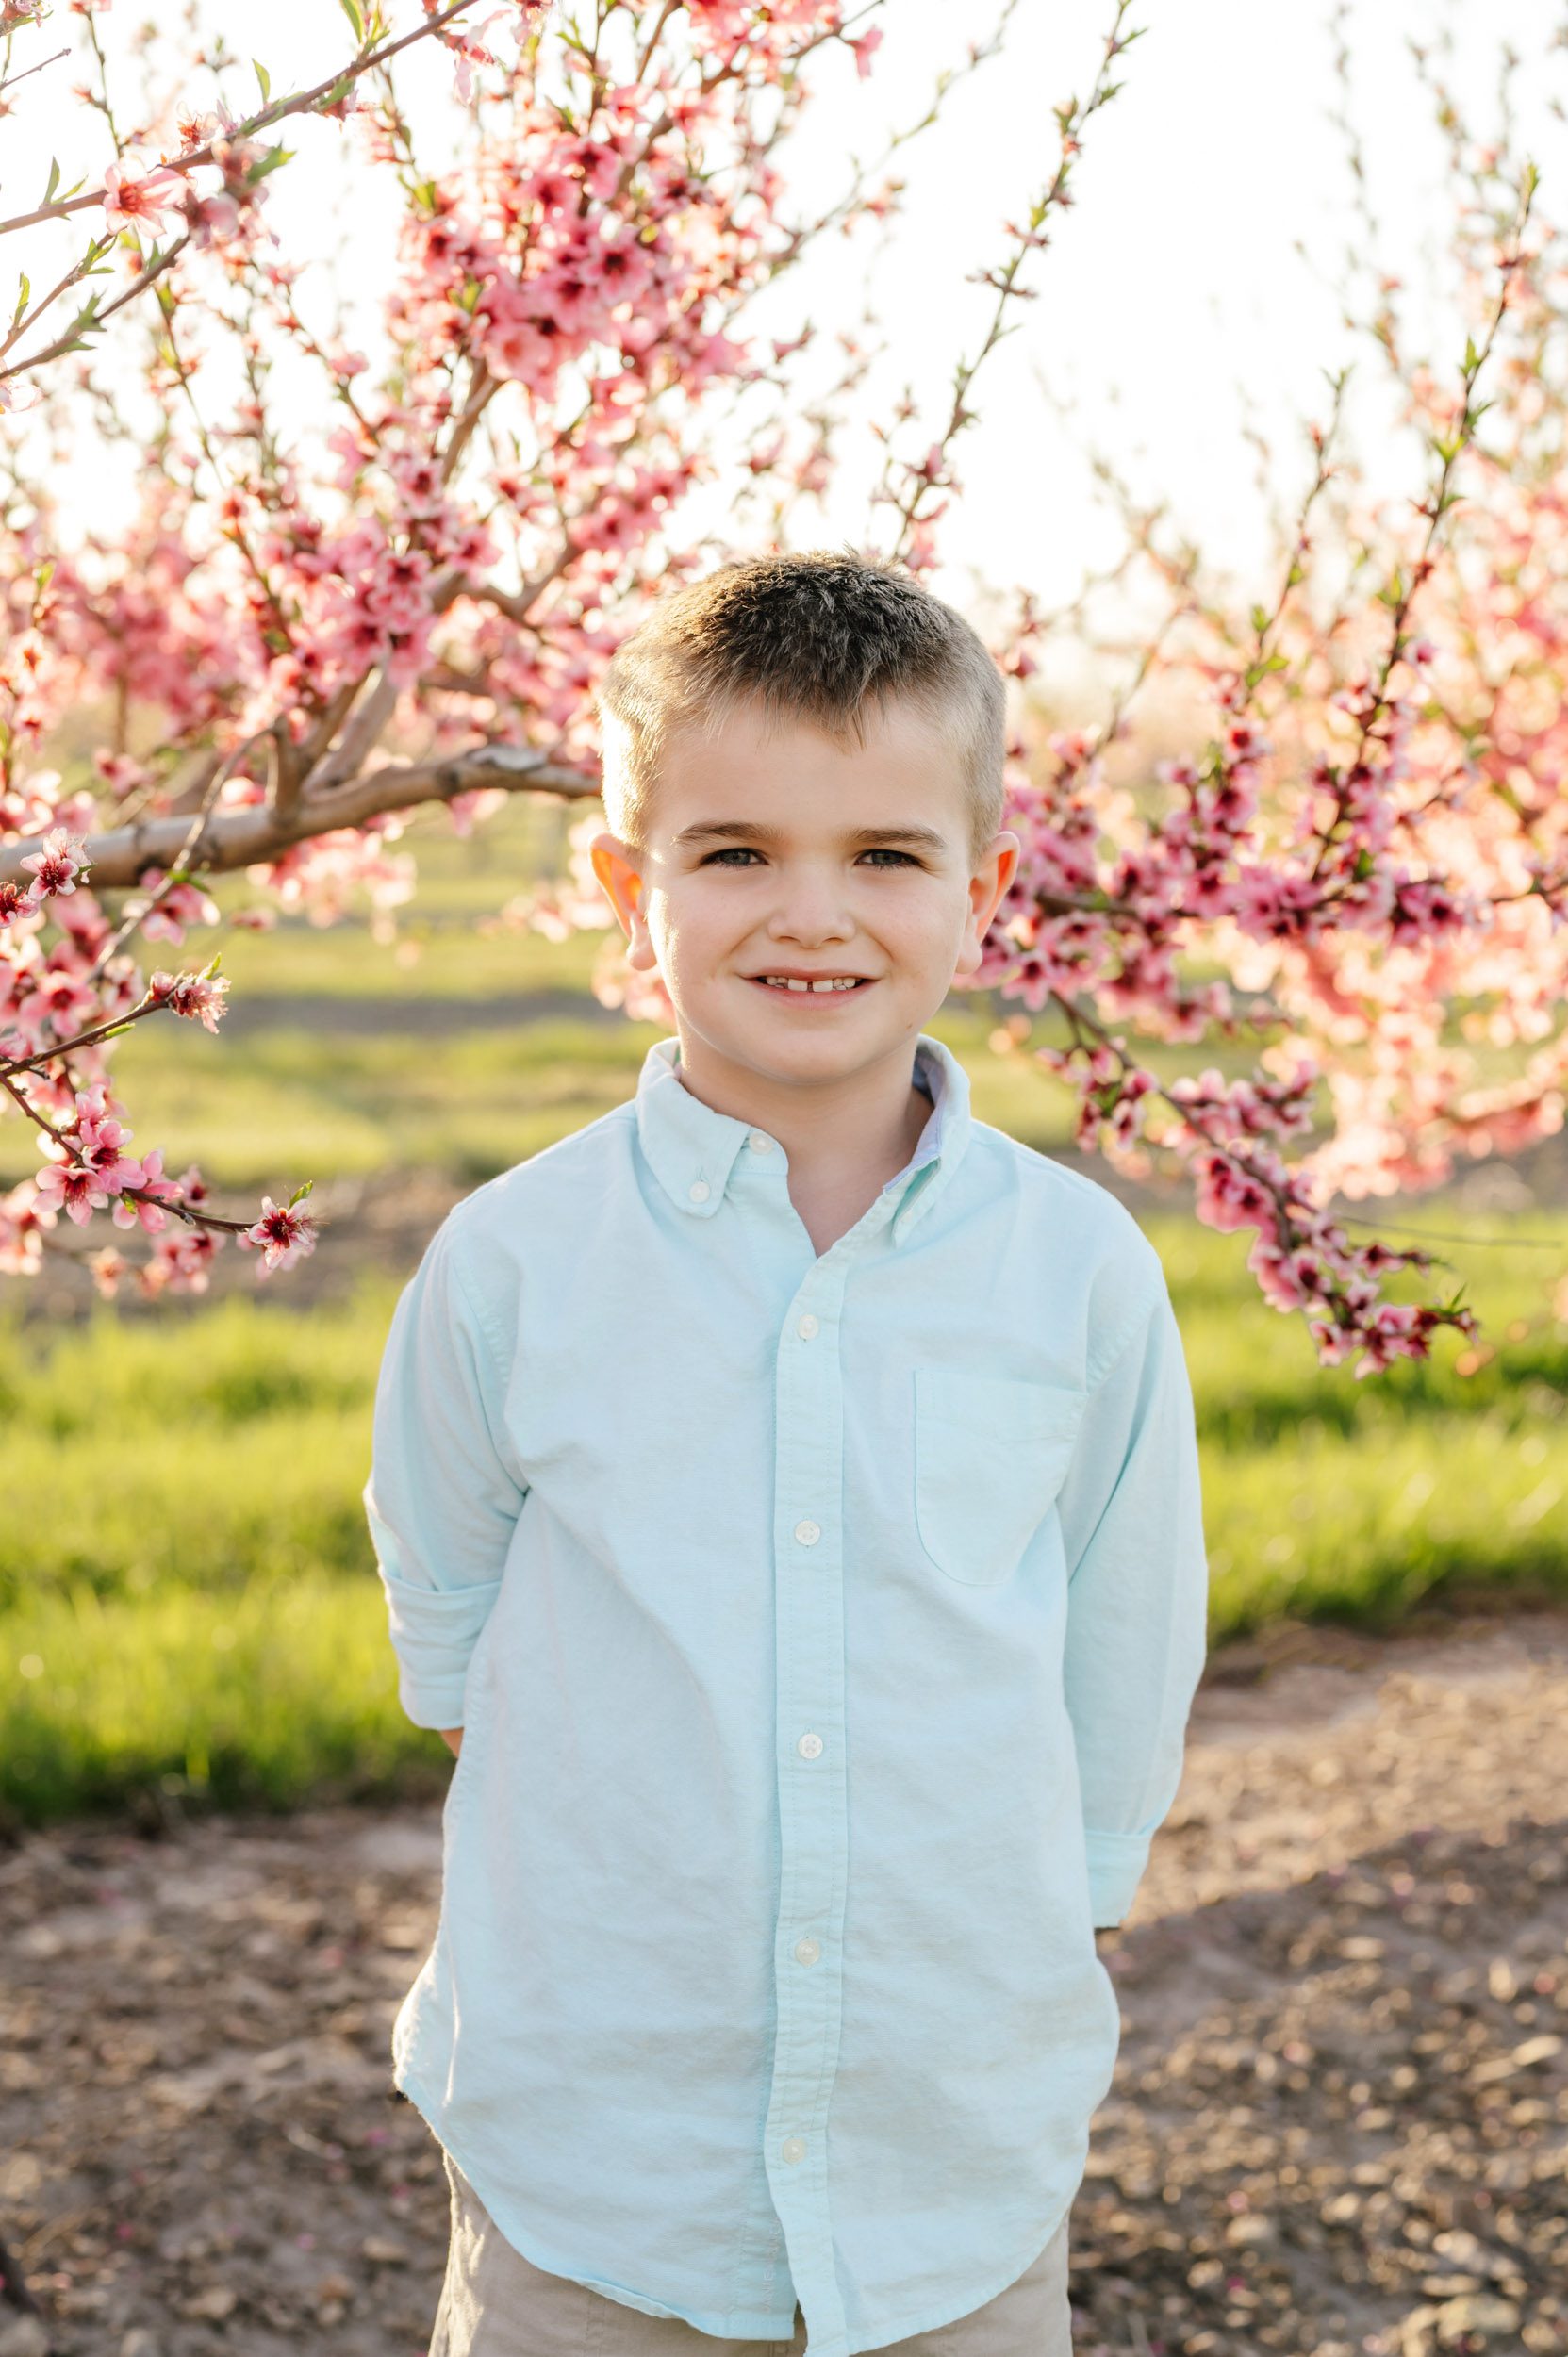 a young boy standing in an orchard of peach blossom trees in bloom and smiling at the camera